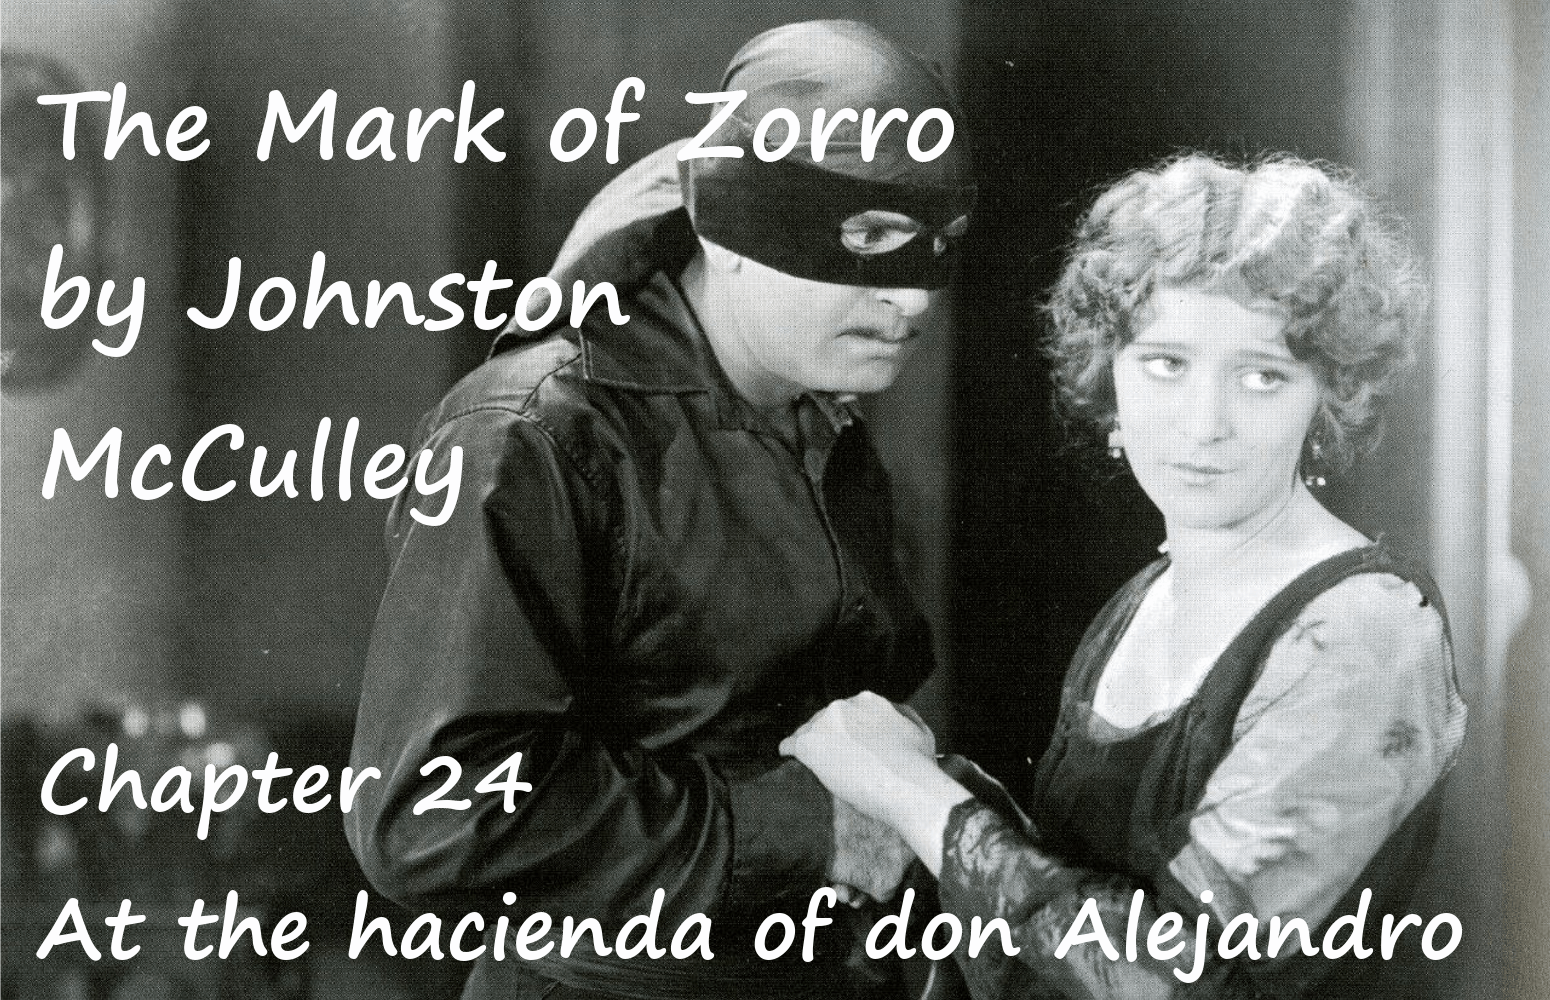 The Mark of Zorro chapter 24 At the hacienda of don Alejandro by Johnston McCulley